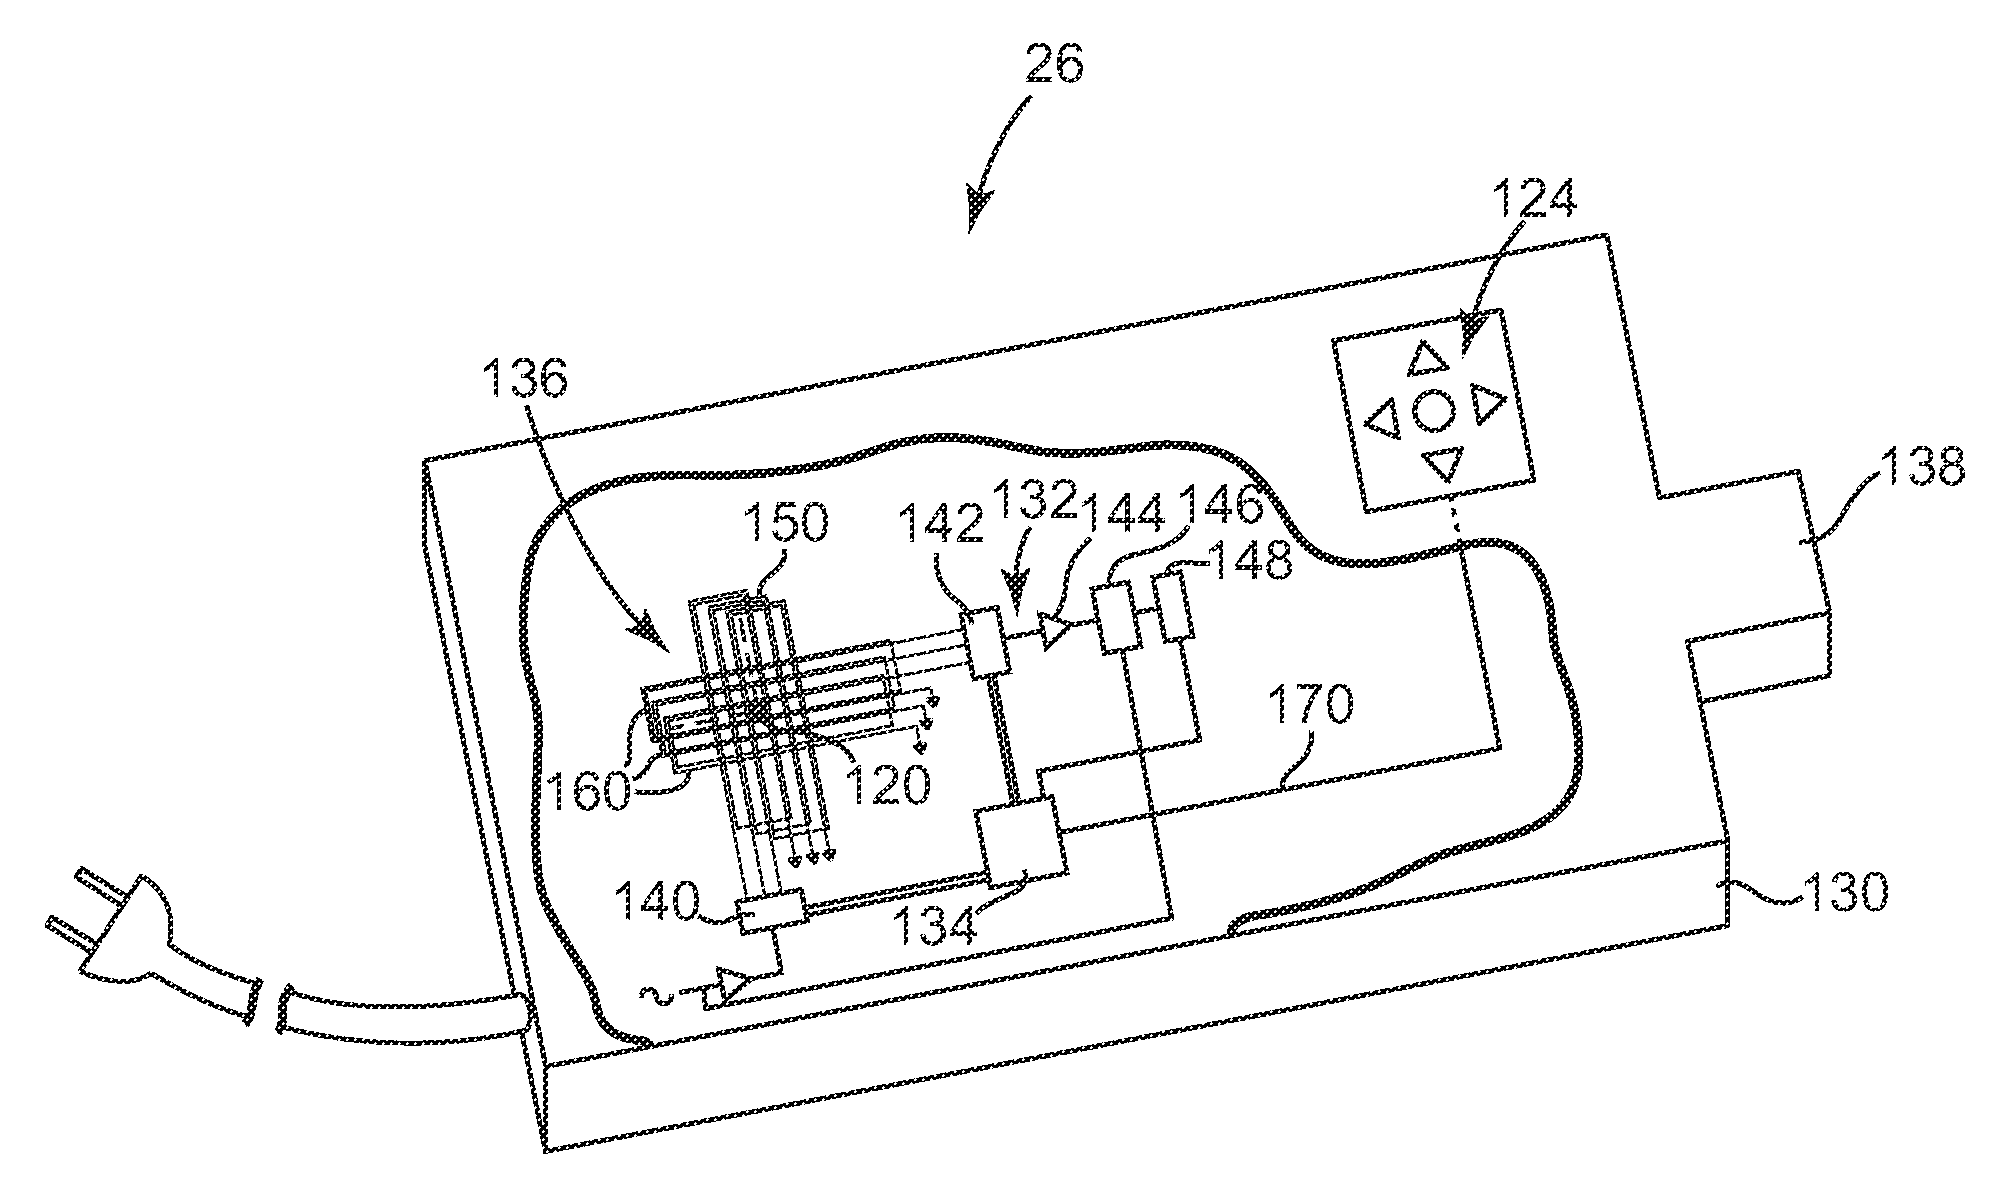 Septum port locator system and method for an implantable therapeutic substance delivery device